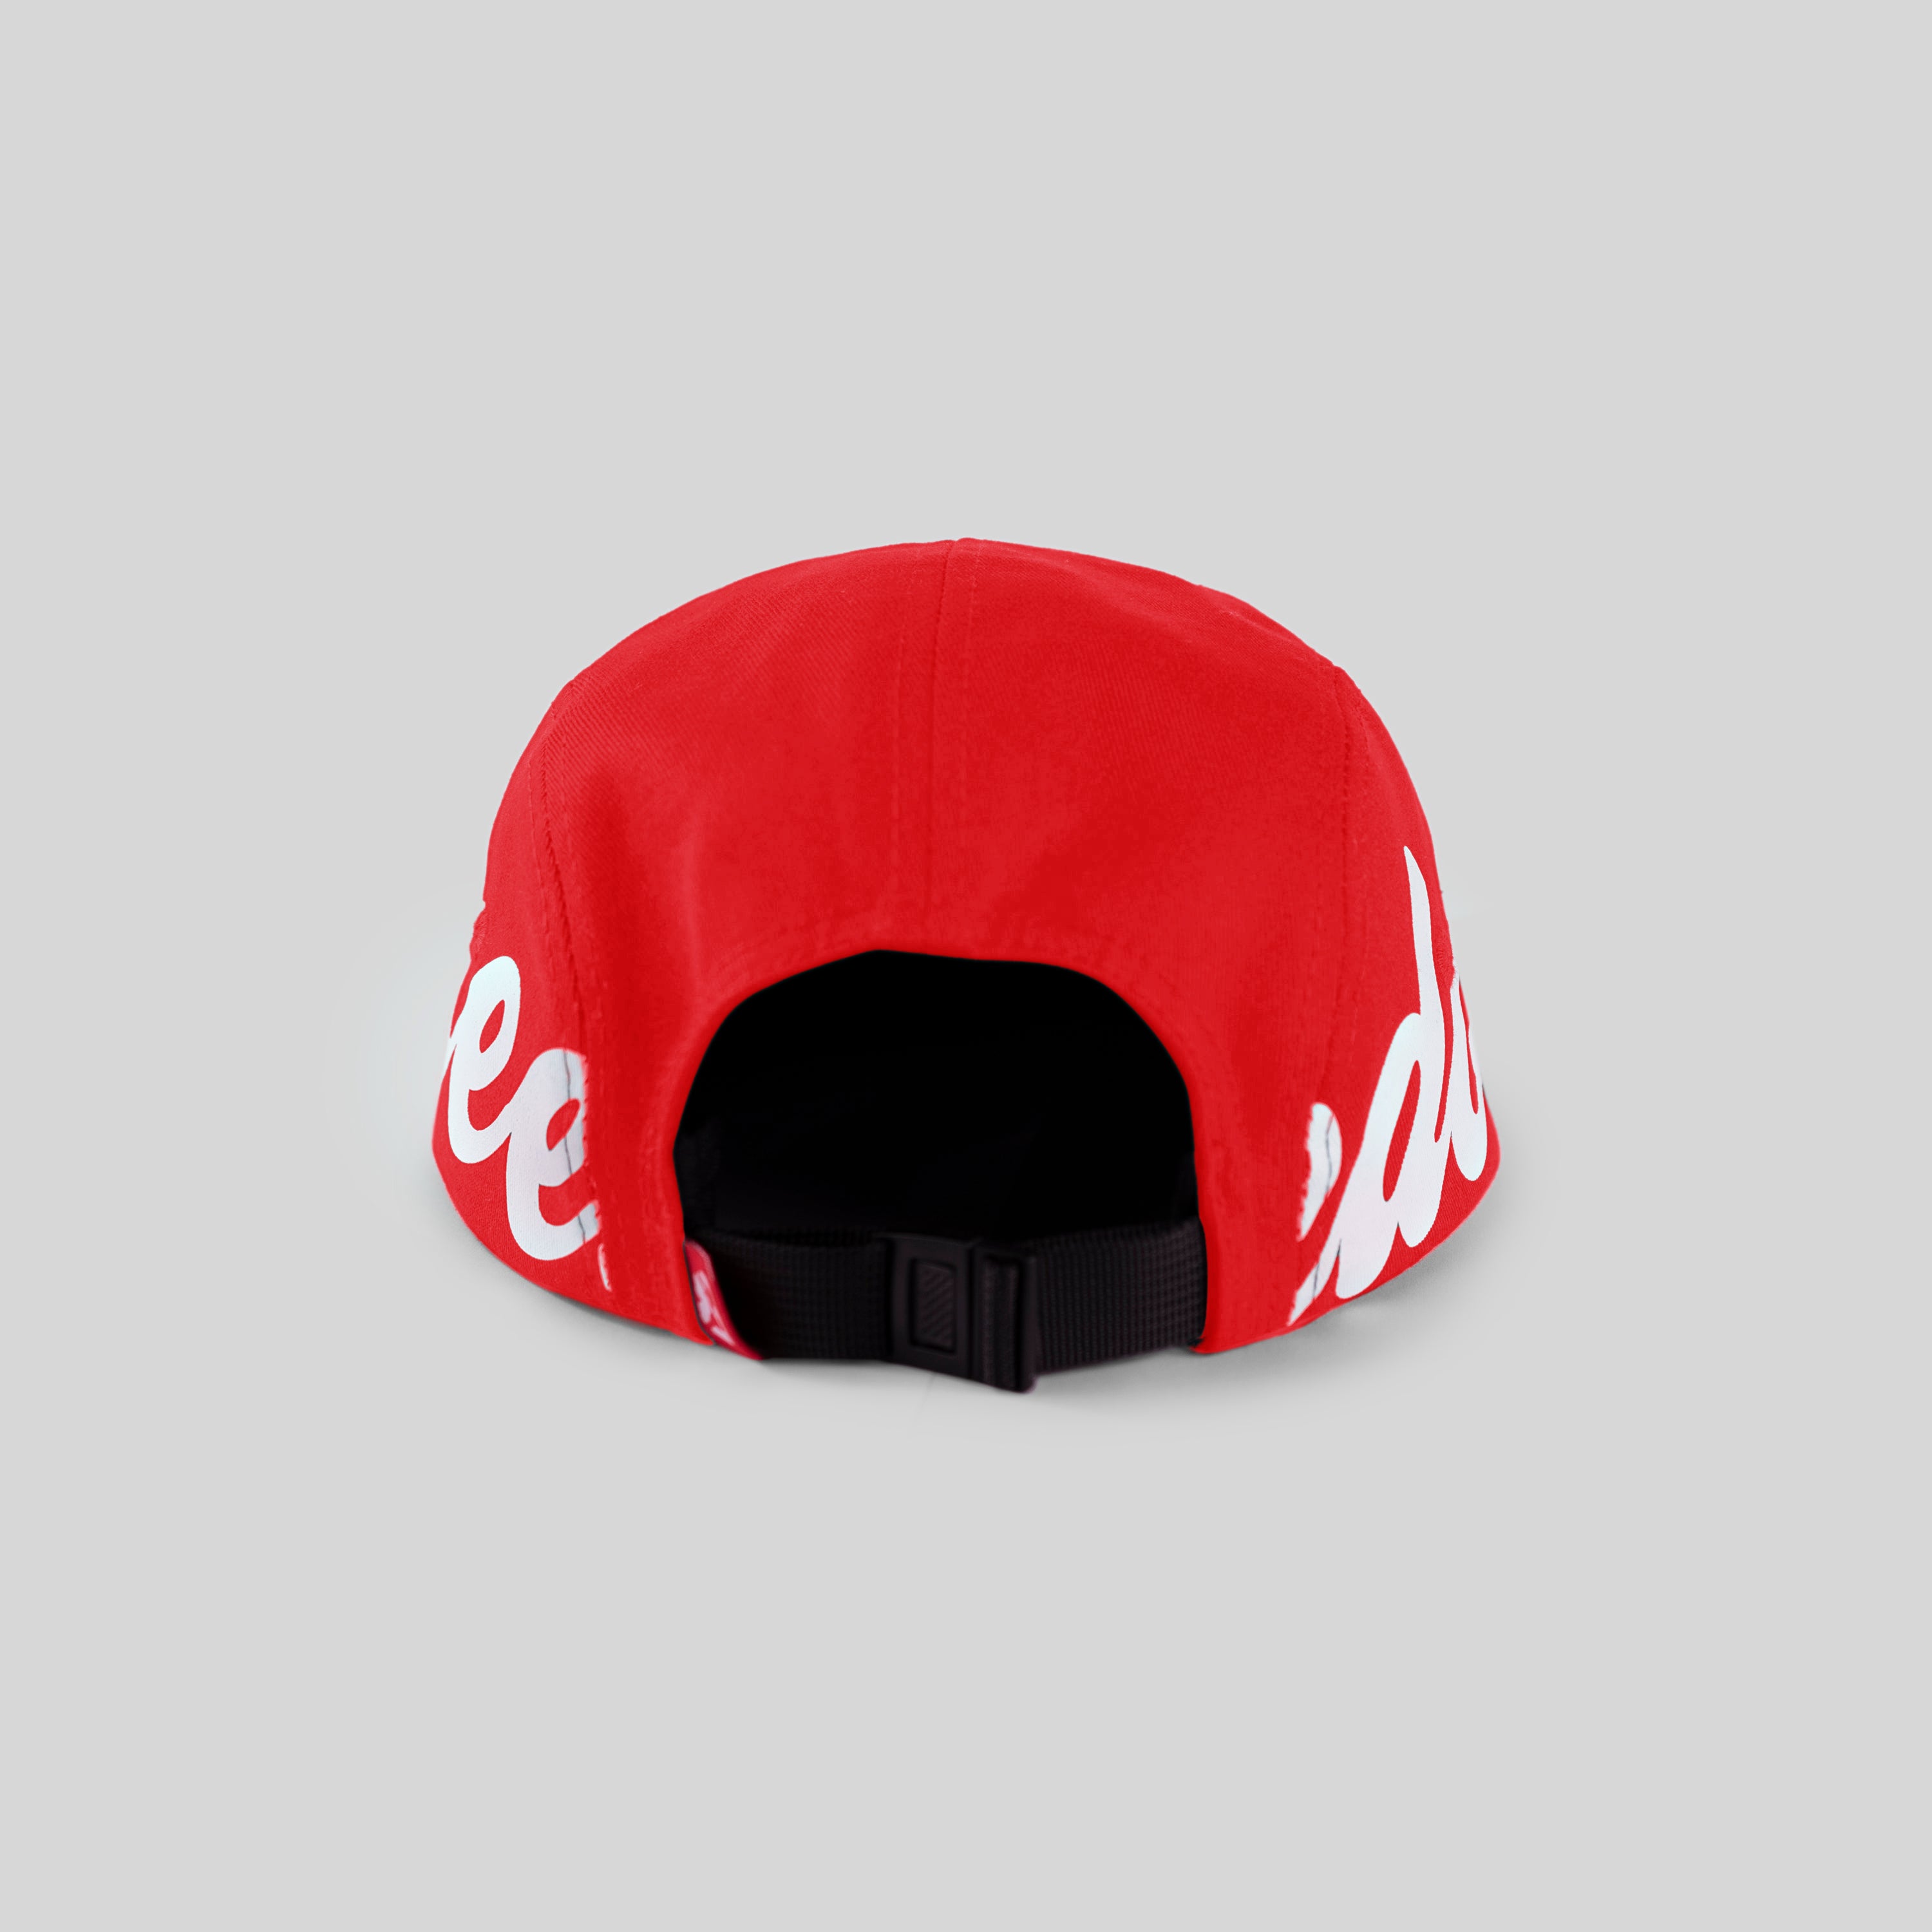 FREEDOM HAT - RED | Freedom 83